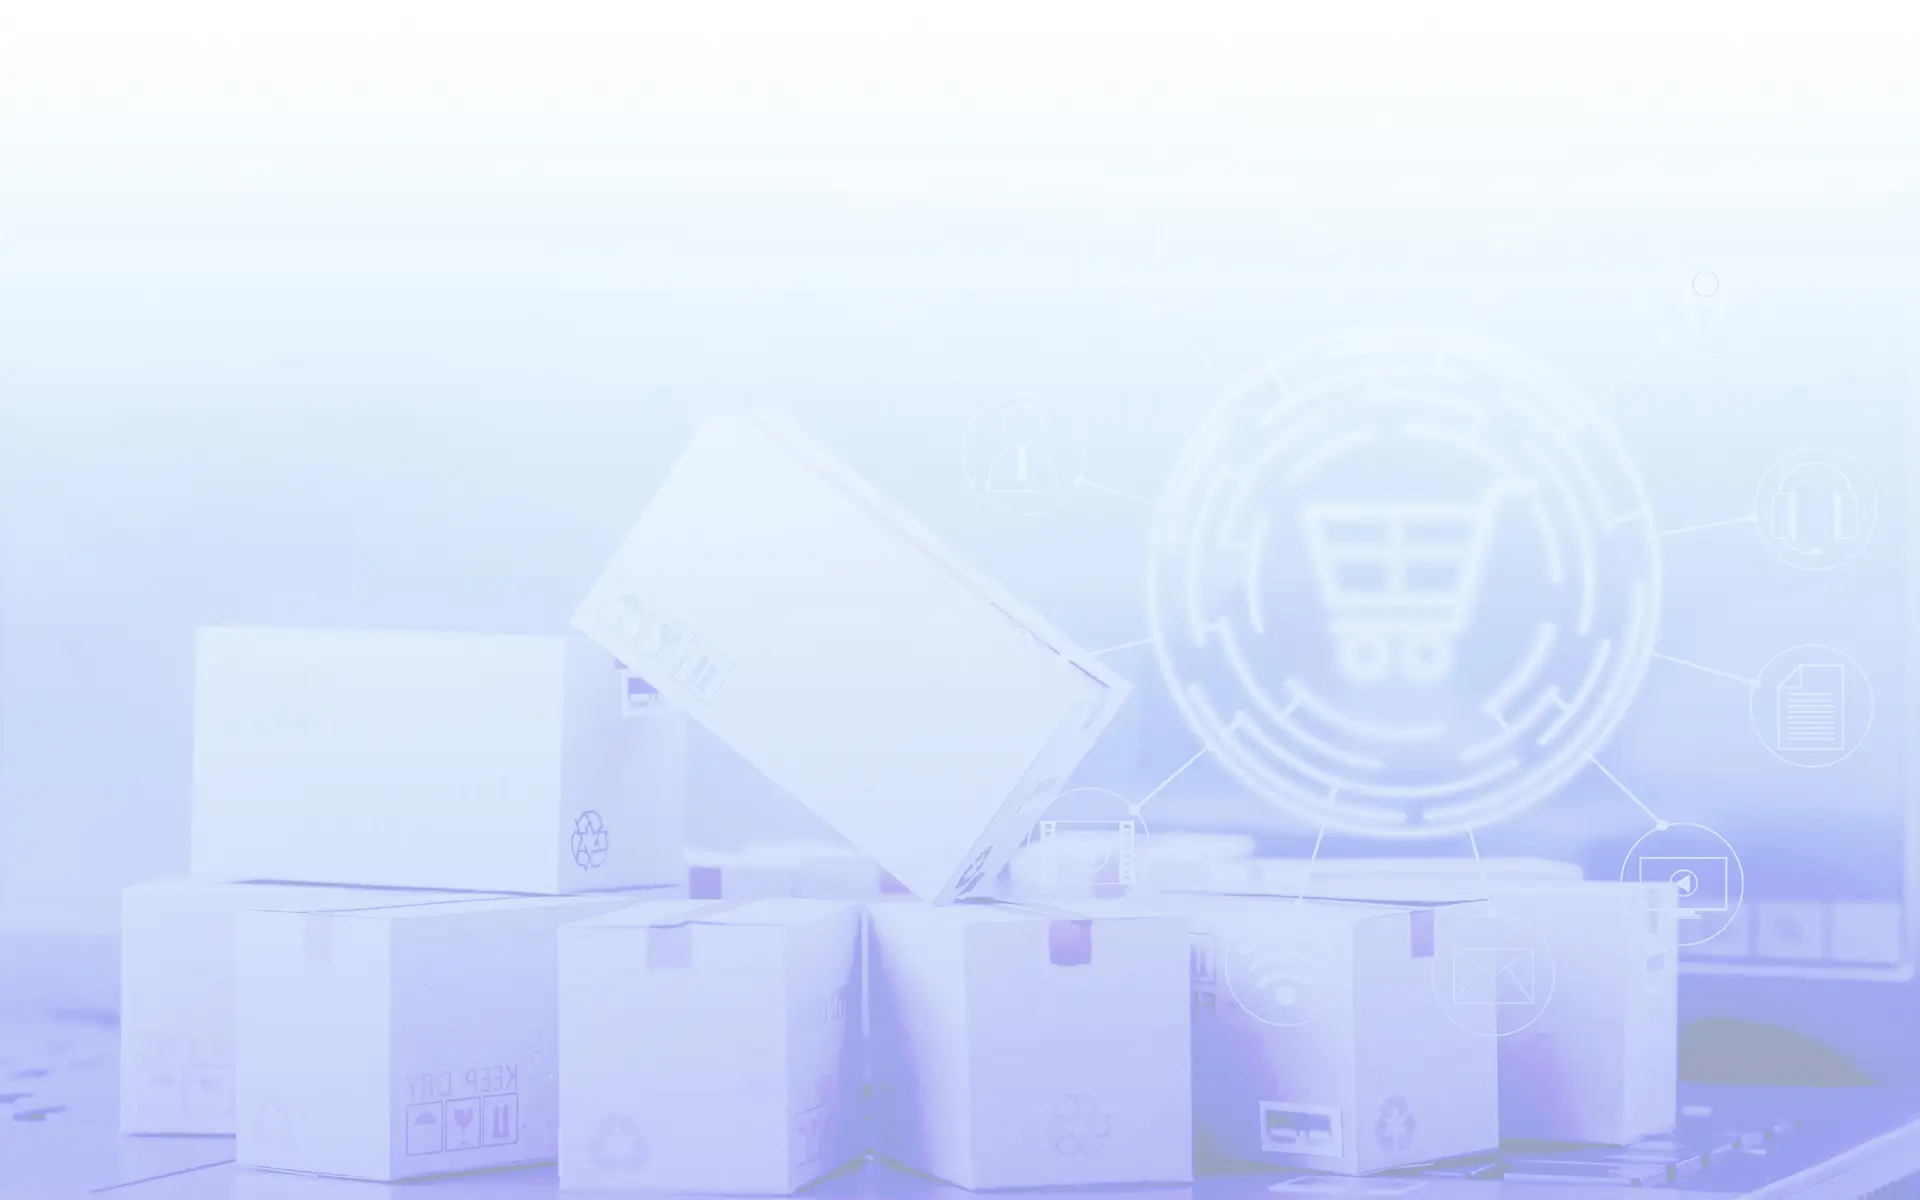 An abstract representation of e-commerce logistics, featuring boxes and digital shopping icons in a pale blue overlay, suggesting a focus on online sales and distribution.